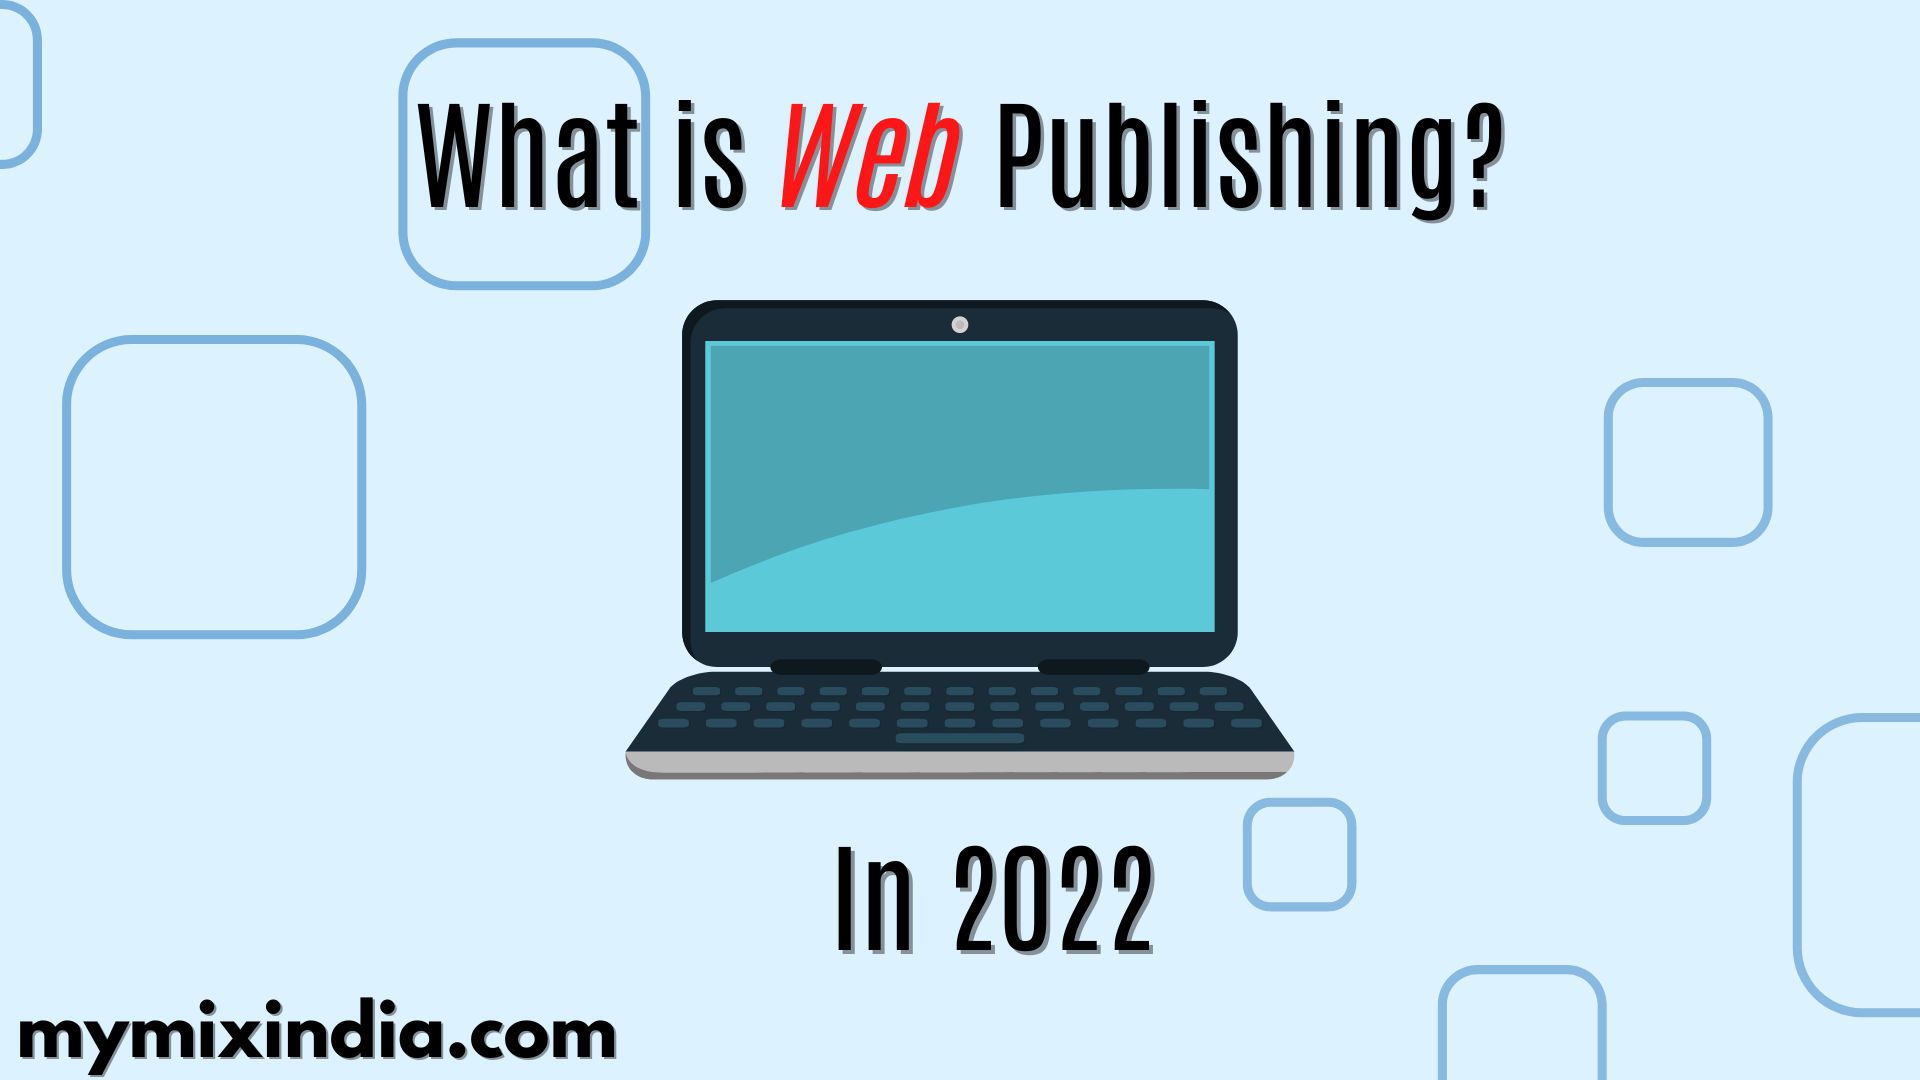 what-is-web-publisching-?-mymixindia.com